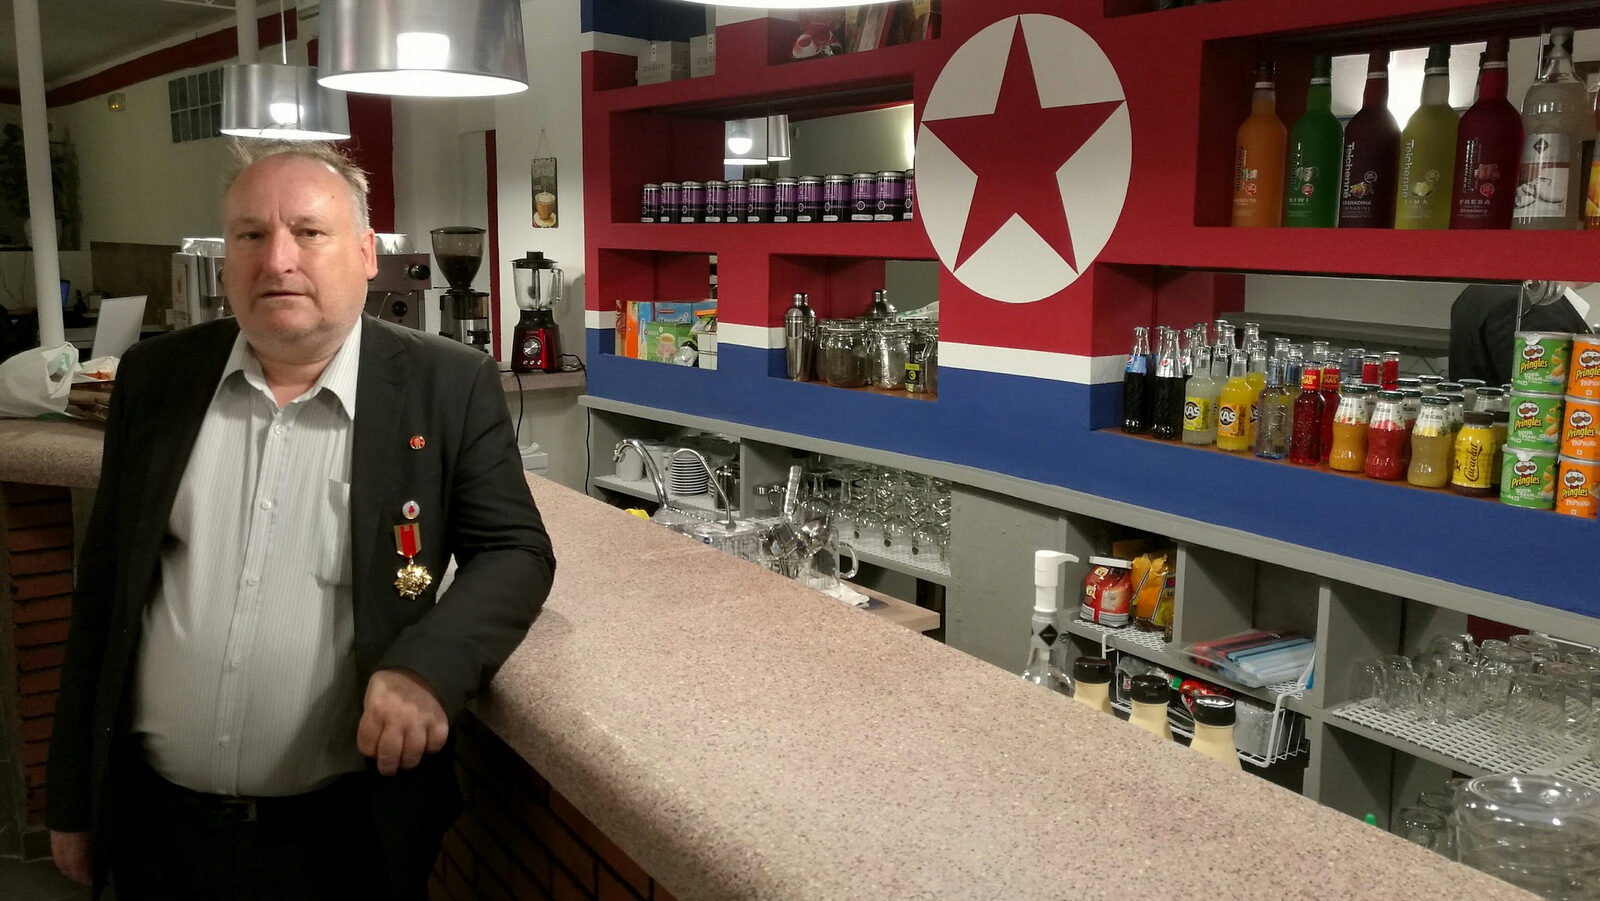 Dermot Hudson, Official Delegate of the KFA at the Pyongyang Cafe in Tarragona, Spain. (Photo: Anglo-Peoples Korea/Songun)